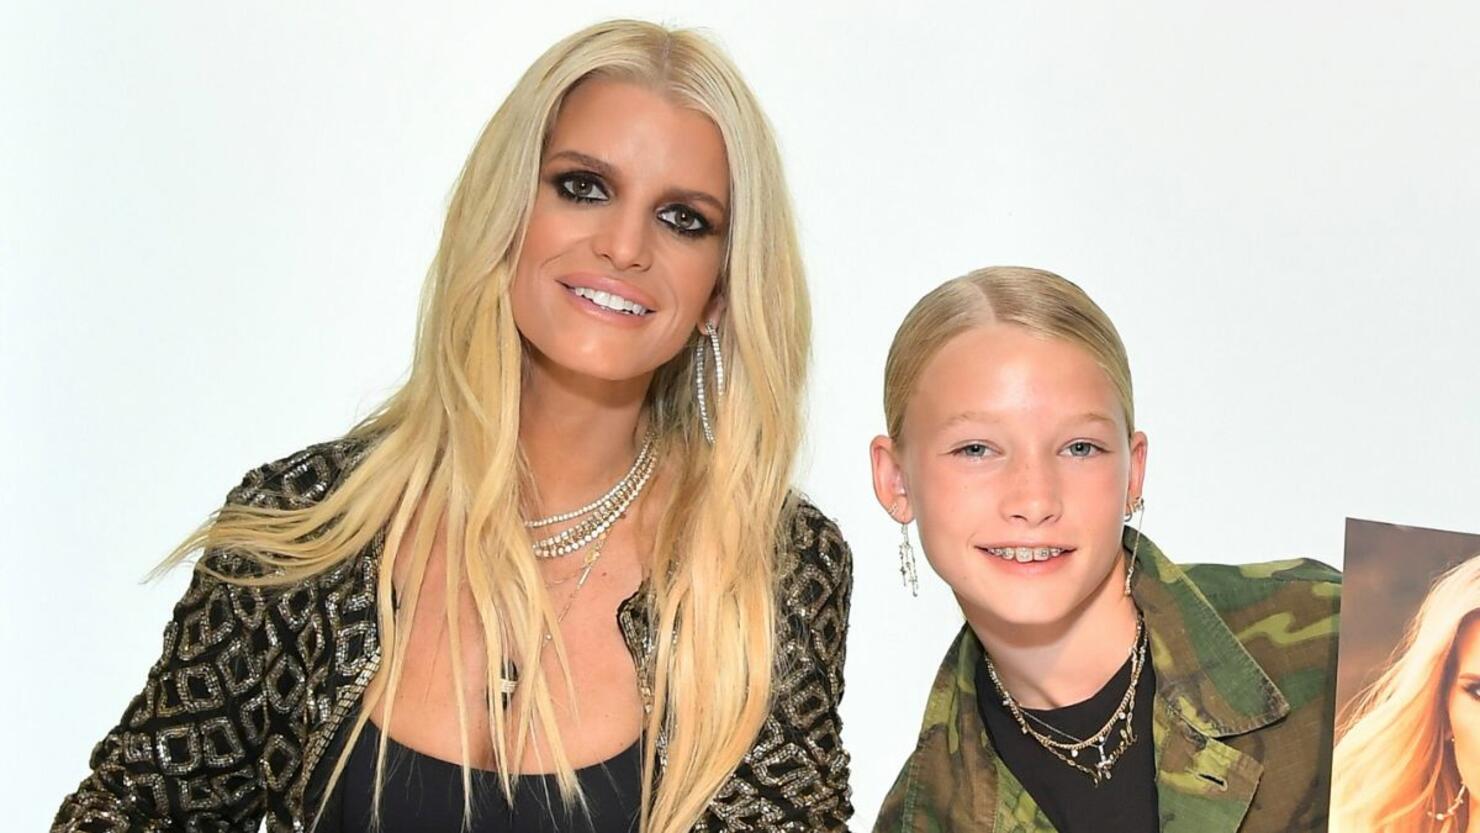 Jessica Simpson Shares the Beauty Lesson Daughter Maxwell Taught Her